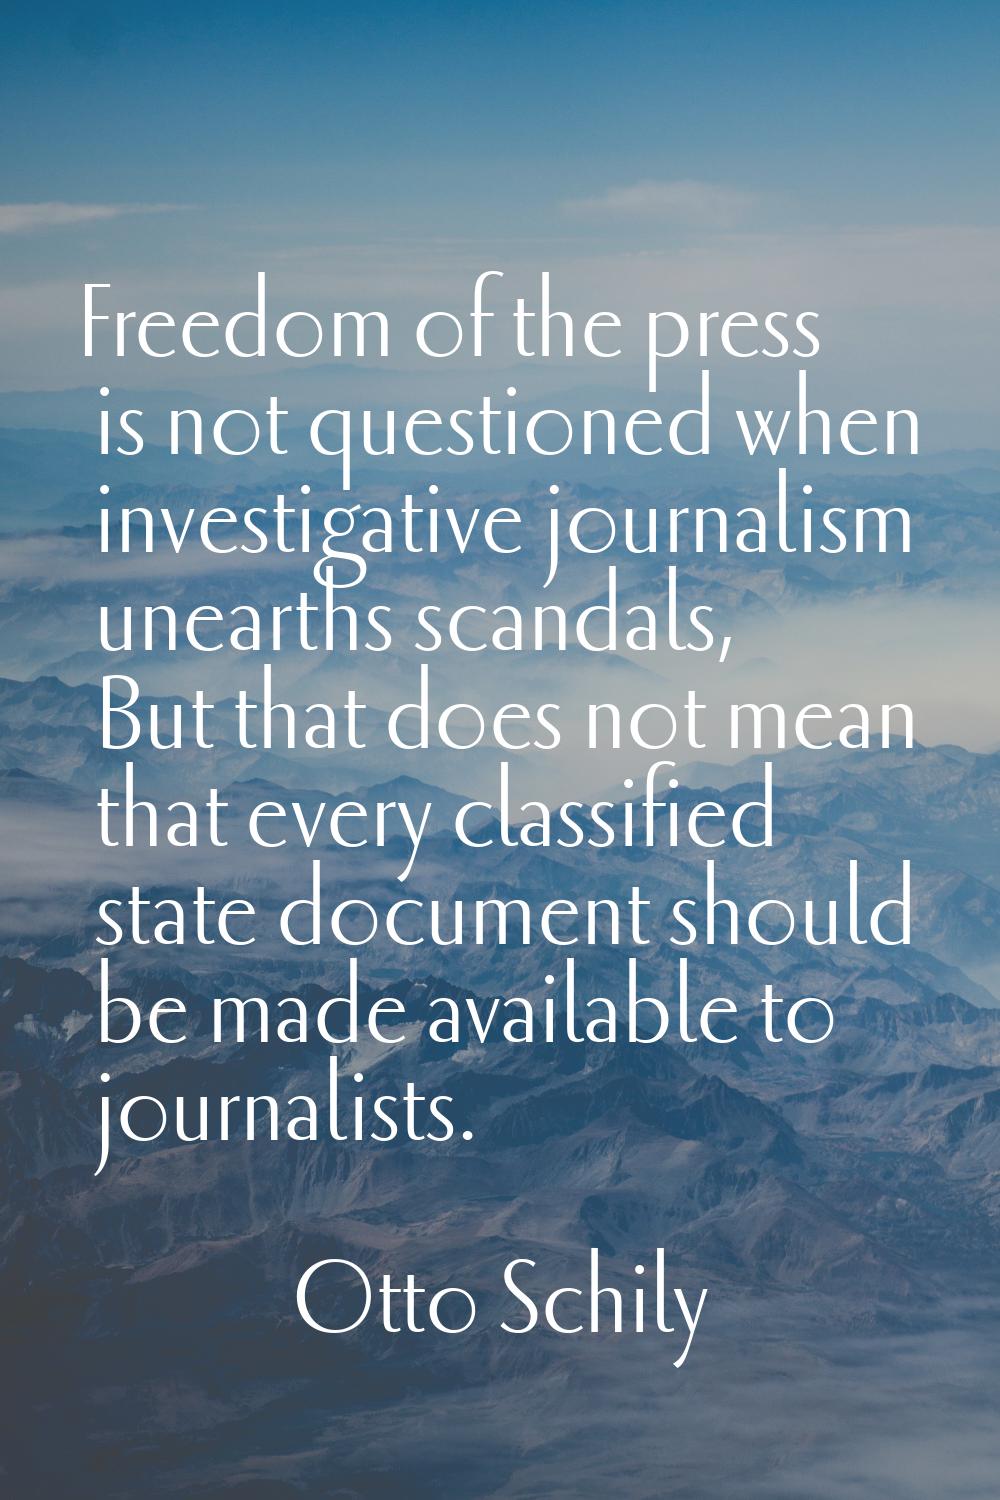 Freedom of the press is not questioned when investigative journalism unearths scandals, But that do